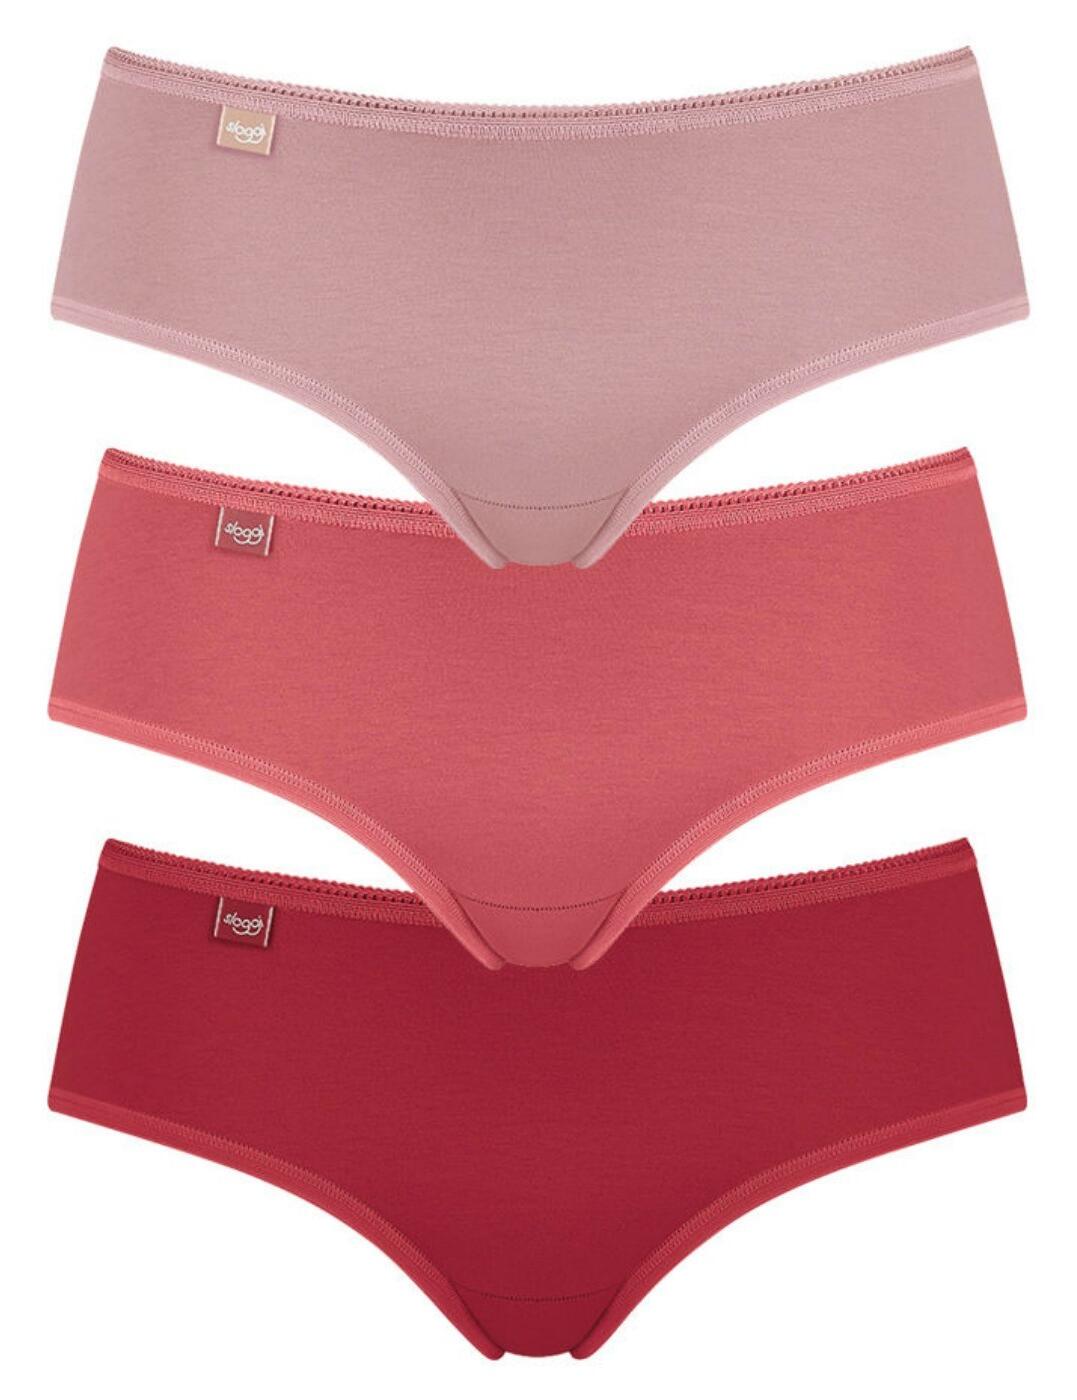 10167193 Sloggi 24/7 Cotton Hipster 3 Pack Brief - 10167193 Red/Light Combination